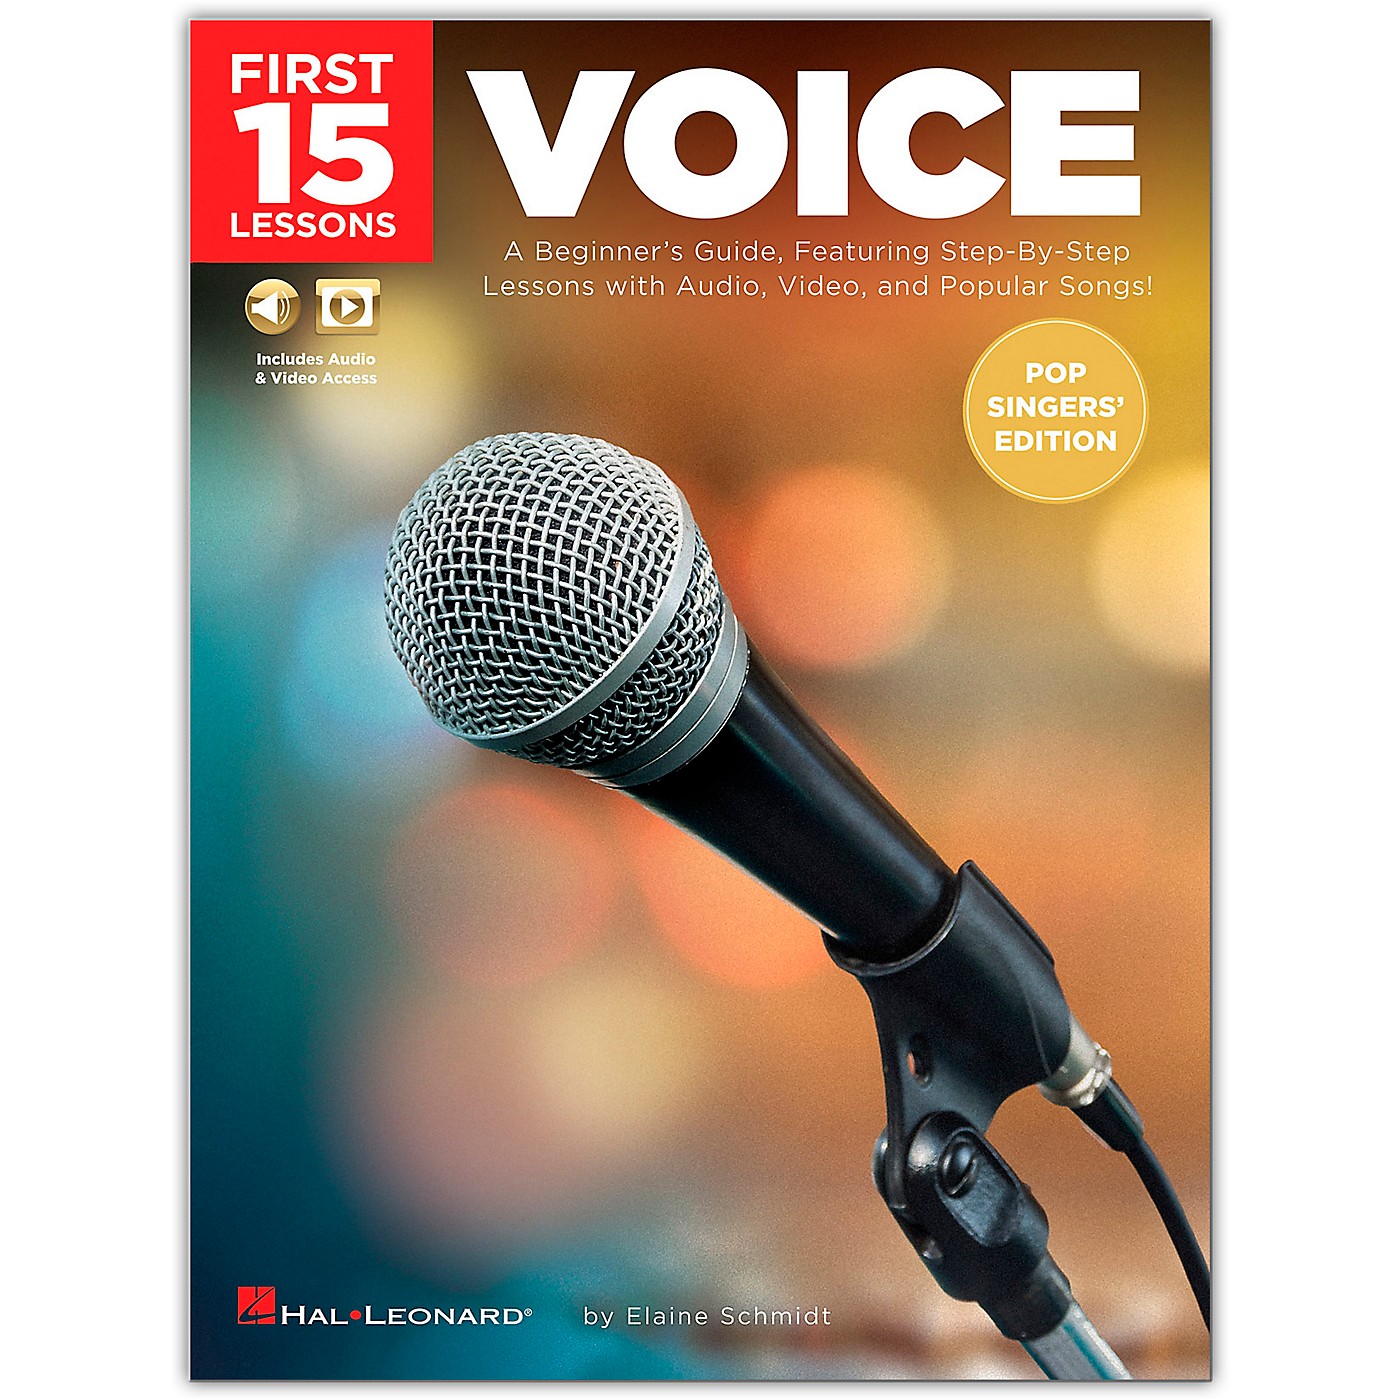 Hal Leonard First 15 Lessons Voice (Pop Singers' Edition) - A Beginner's Guide, Featuring Step-By-Step Lessons with Audio, Video, and Popular Songs! Book/Media Online thumbnail